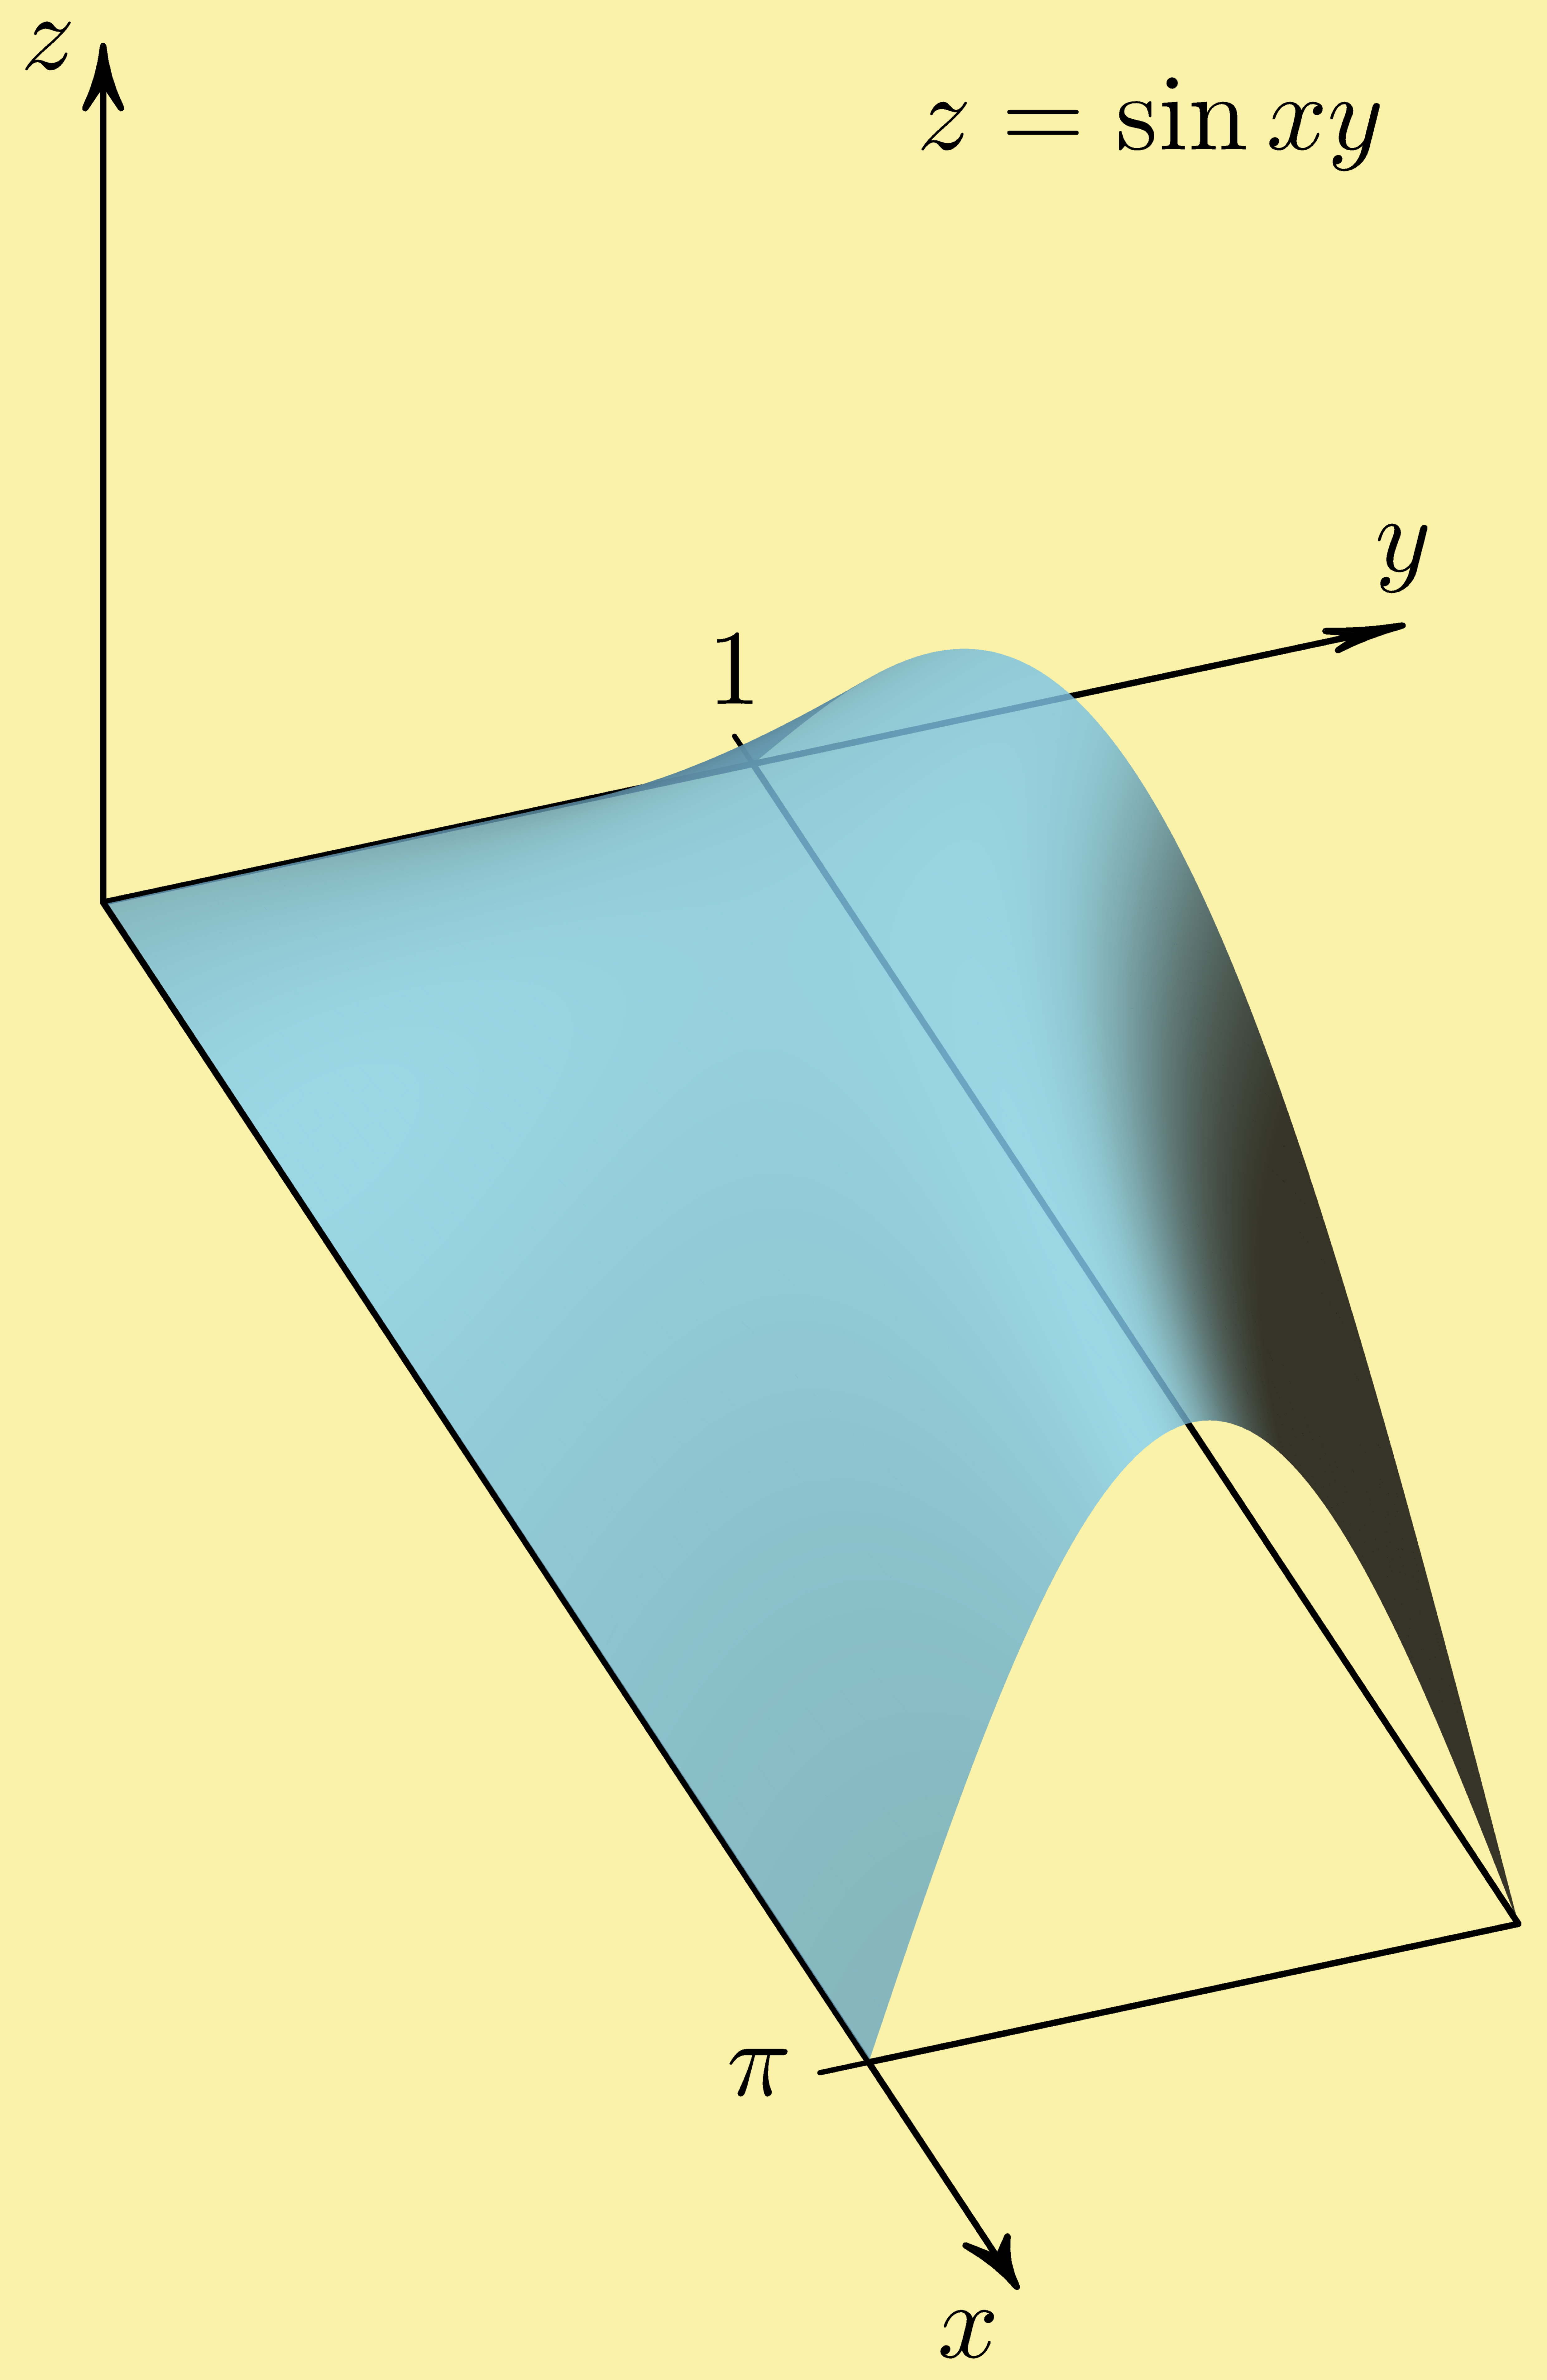 function surface graph extrema 3-space coordinate system xyz R3 Cartesian three-space z=sin(xy)